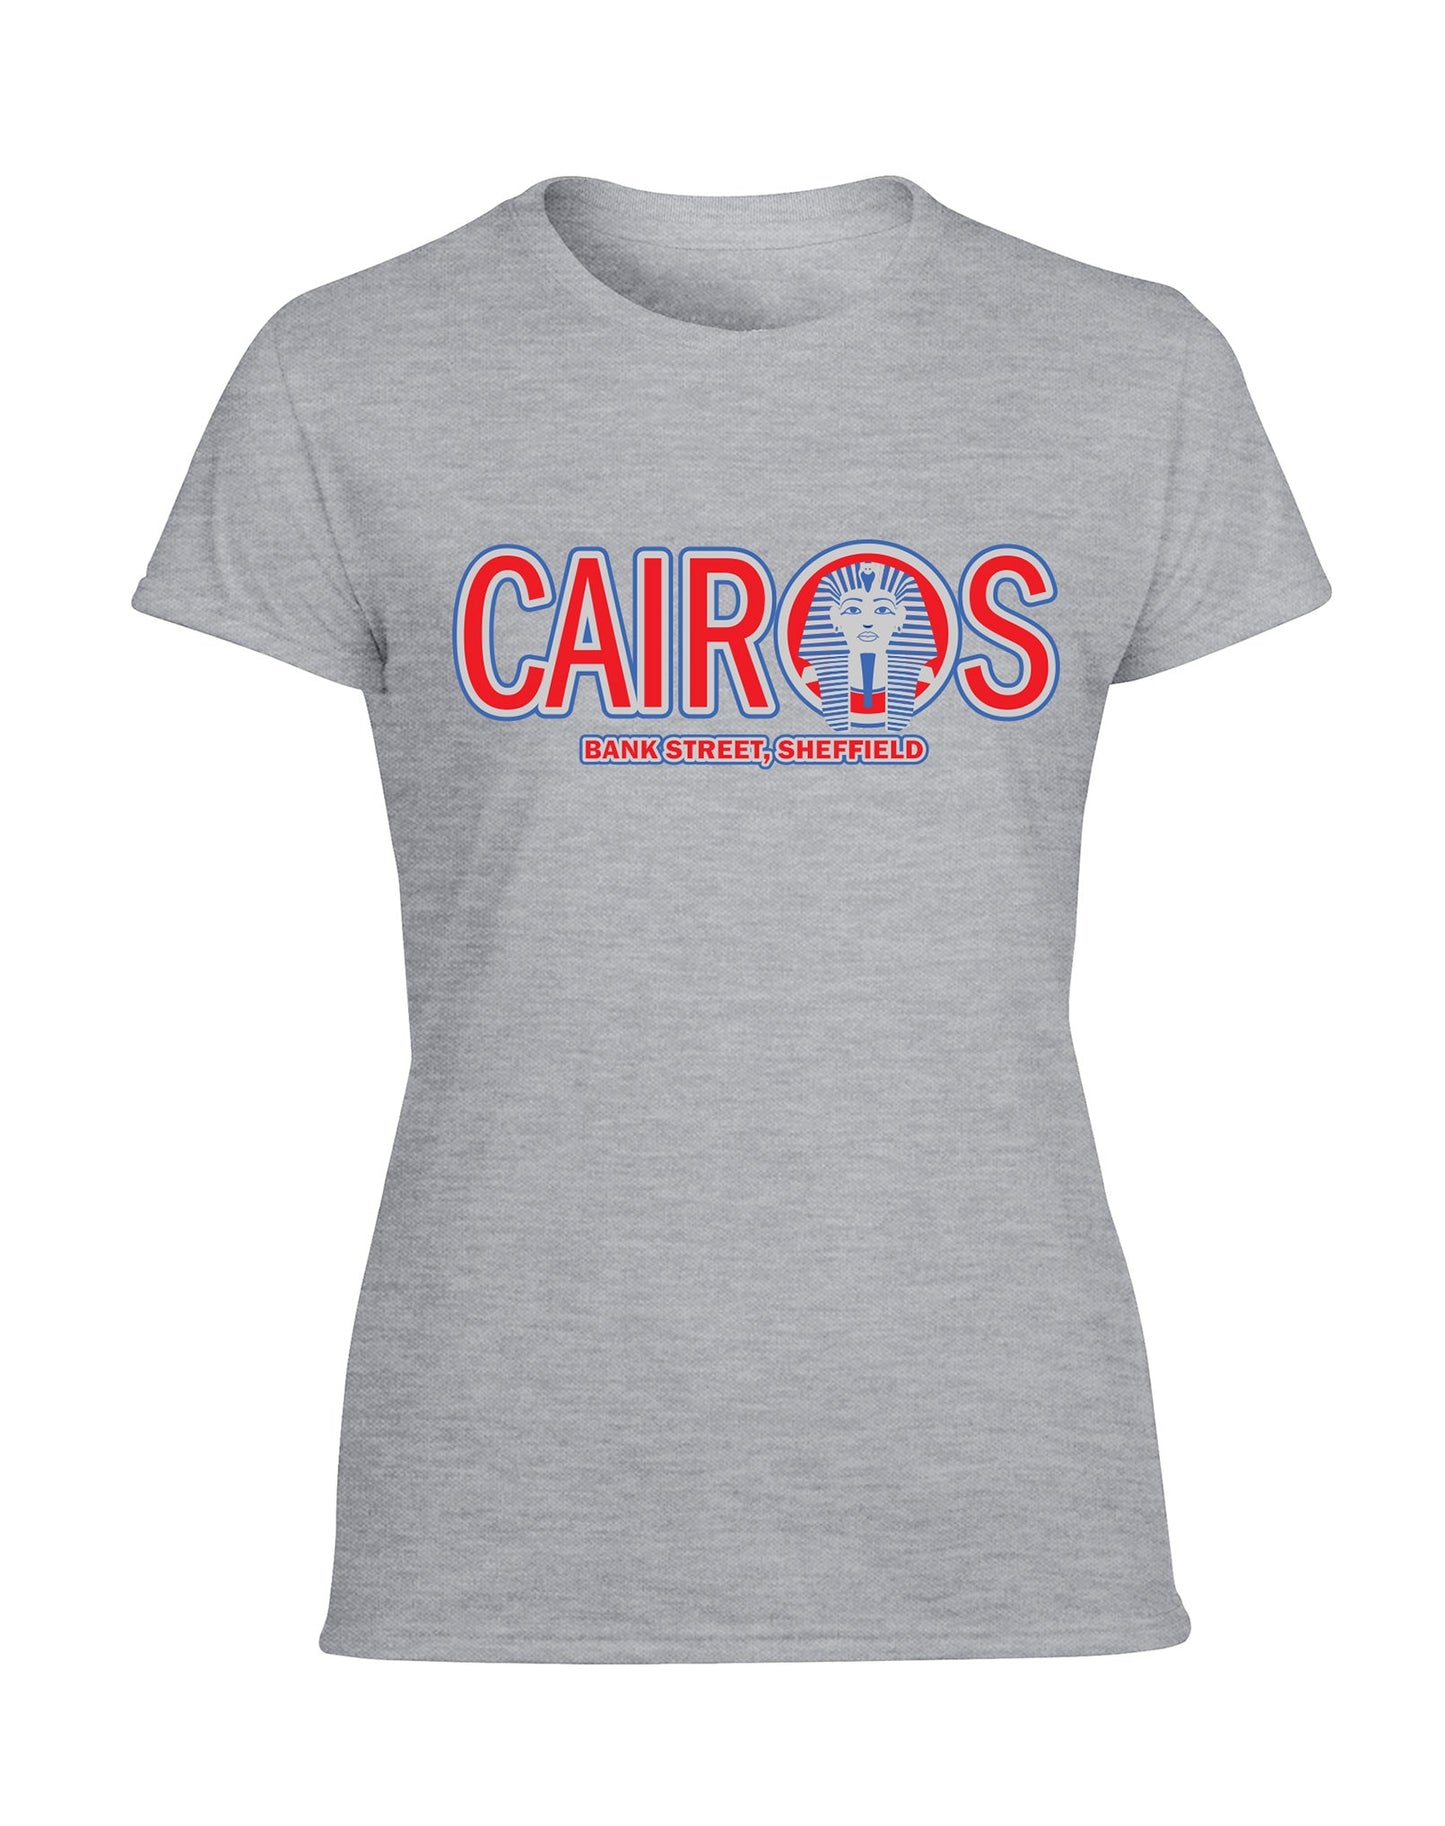 Cairos ladies fit t-shirt- various colours - Dirty Stop Outs